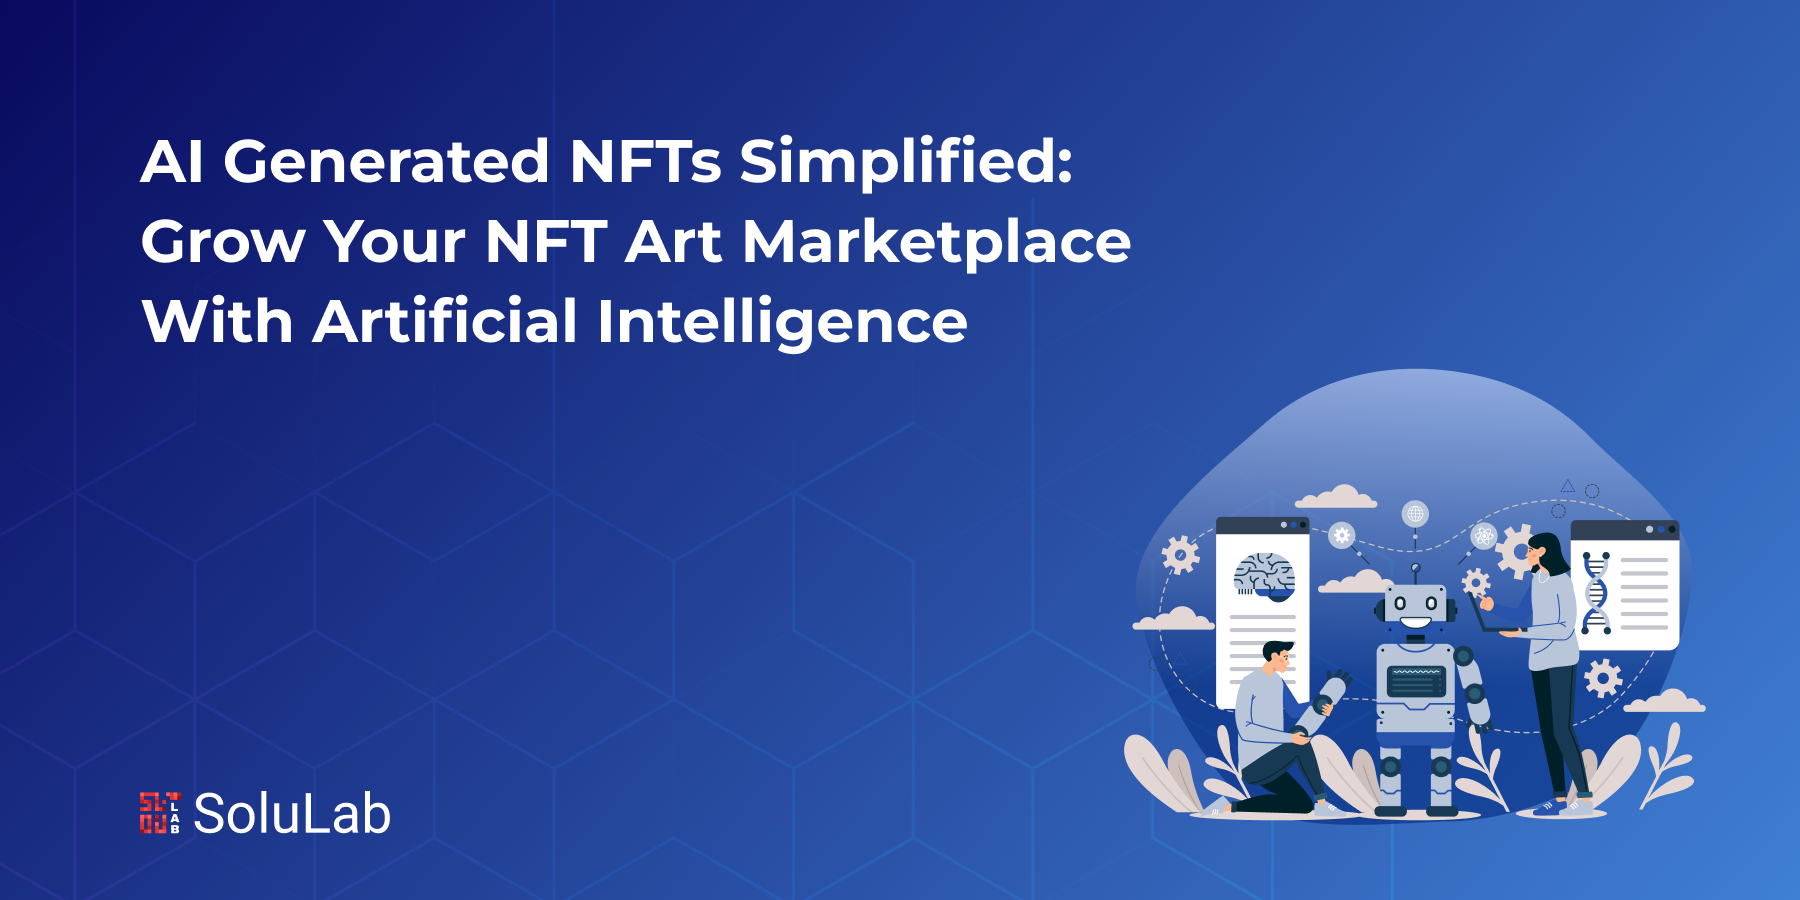 AI Generated NFTs Simplified: Grow Your NFT Art Marketplace with Artificial Intelligence